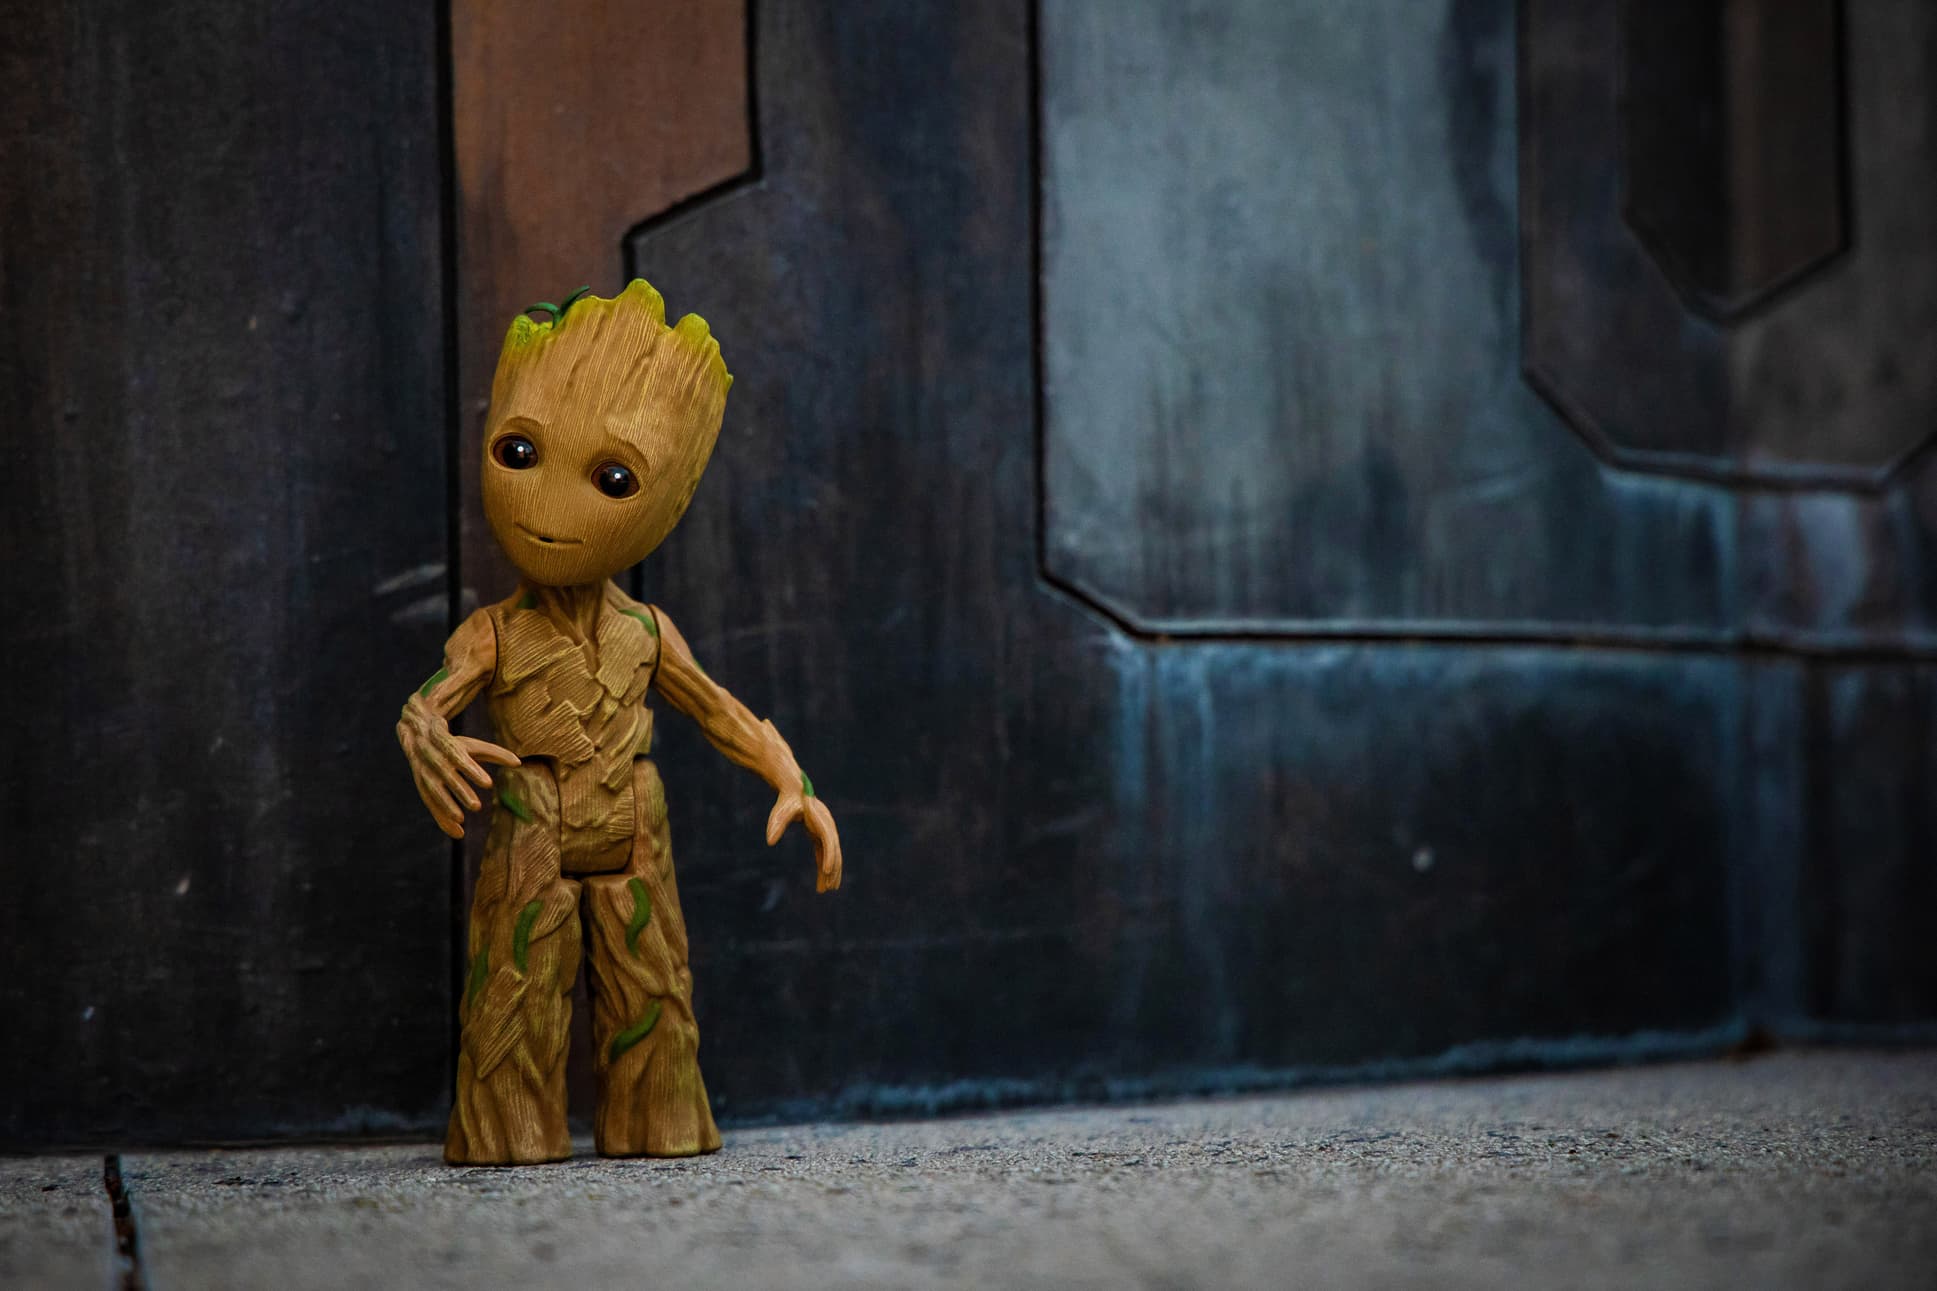 1 X Groot Dancing Figure From Guardians of The Galaxy New5 for sale online 